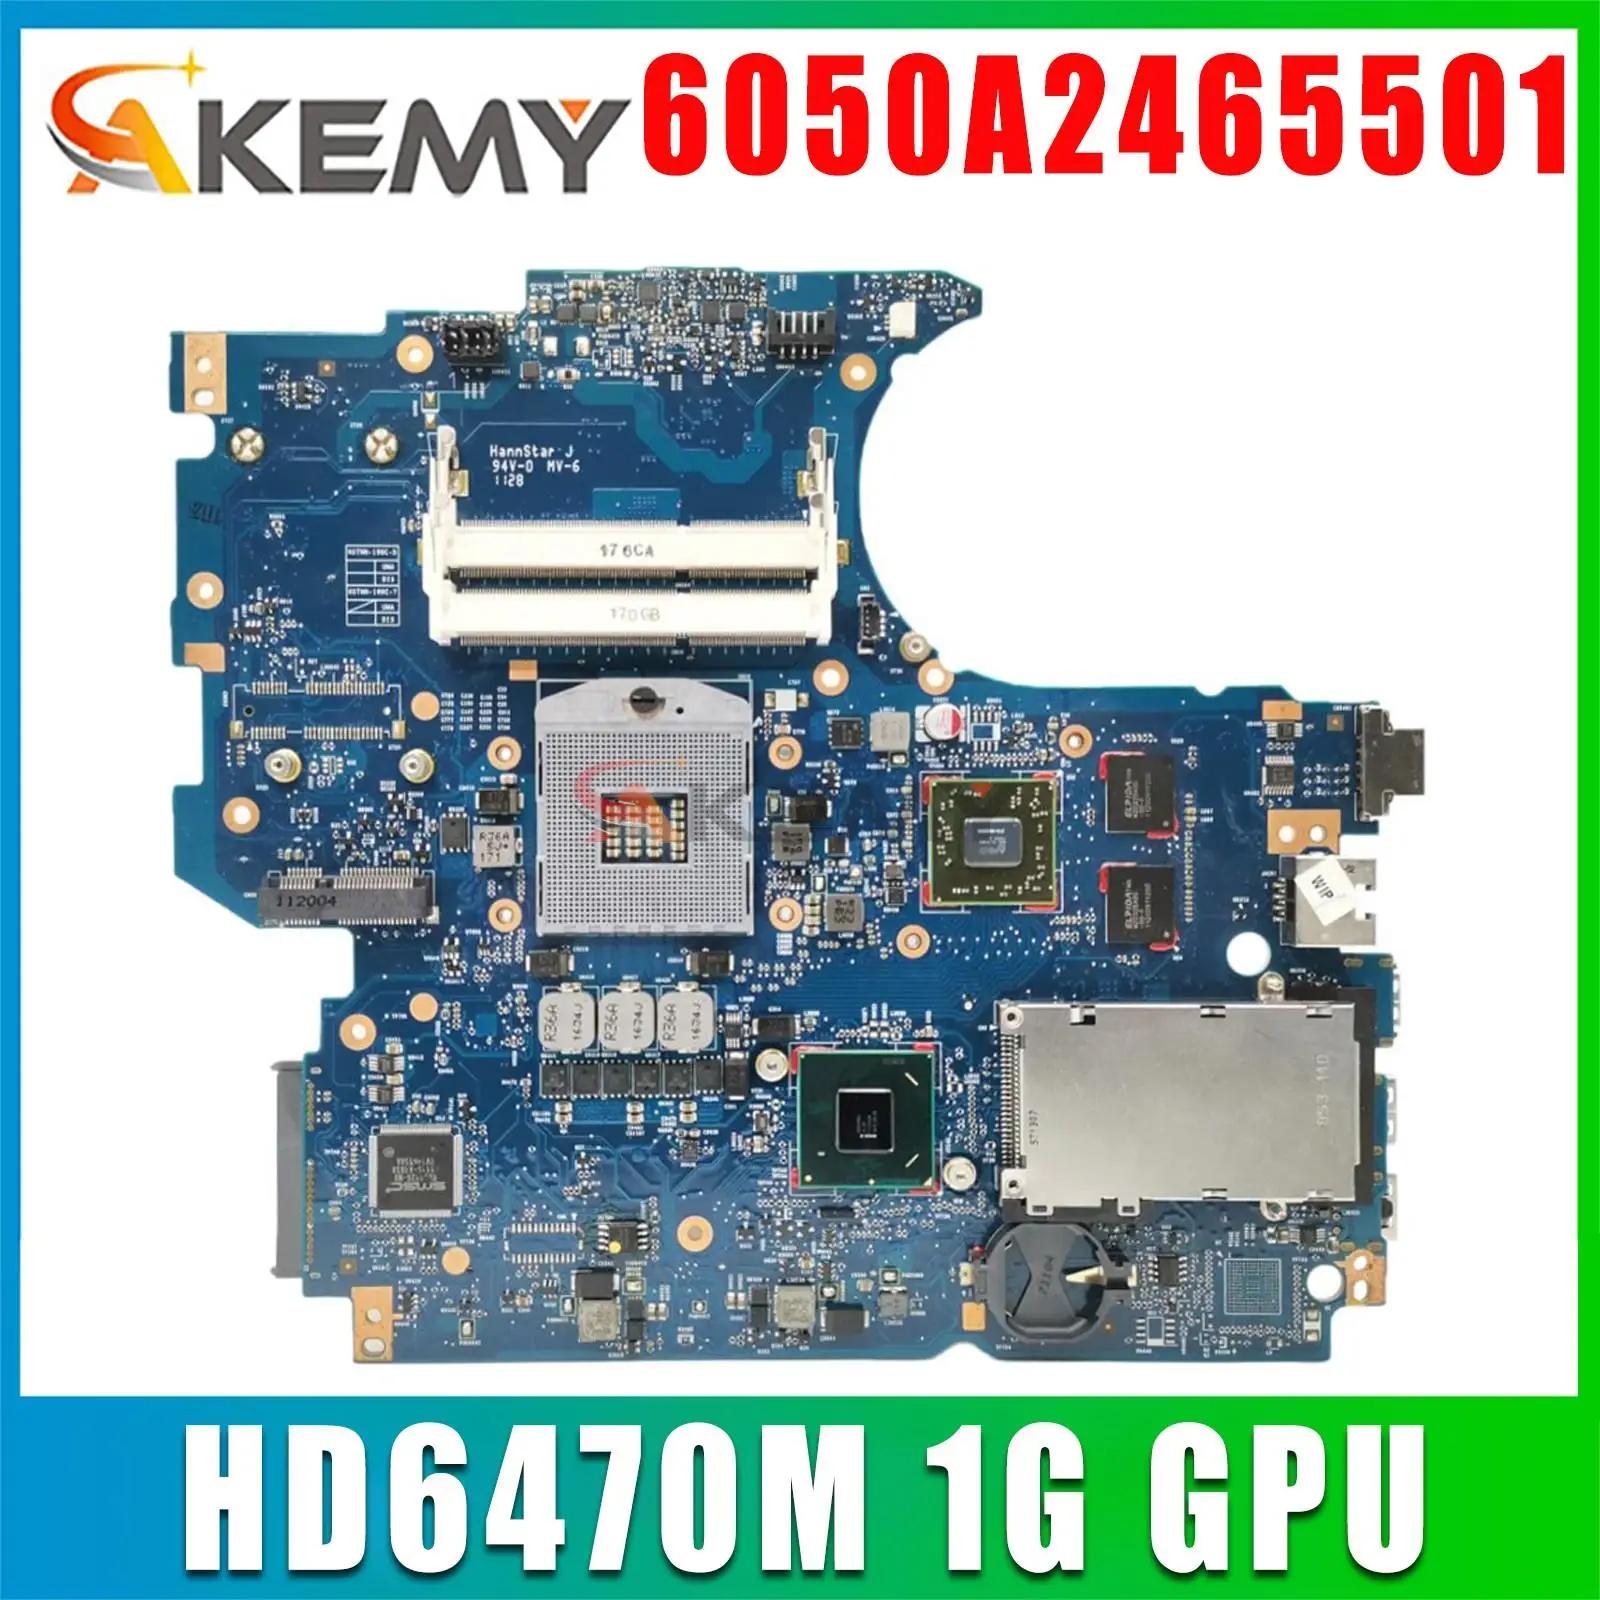 

670795-001 658343-001 670794-001 For HP ProBook 4530S 4730S Laptop Motherboard HM65 6050A2465501 With HD6470M 1G GPU